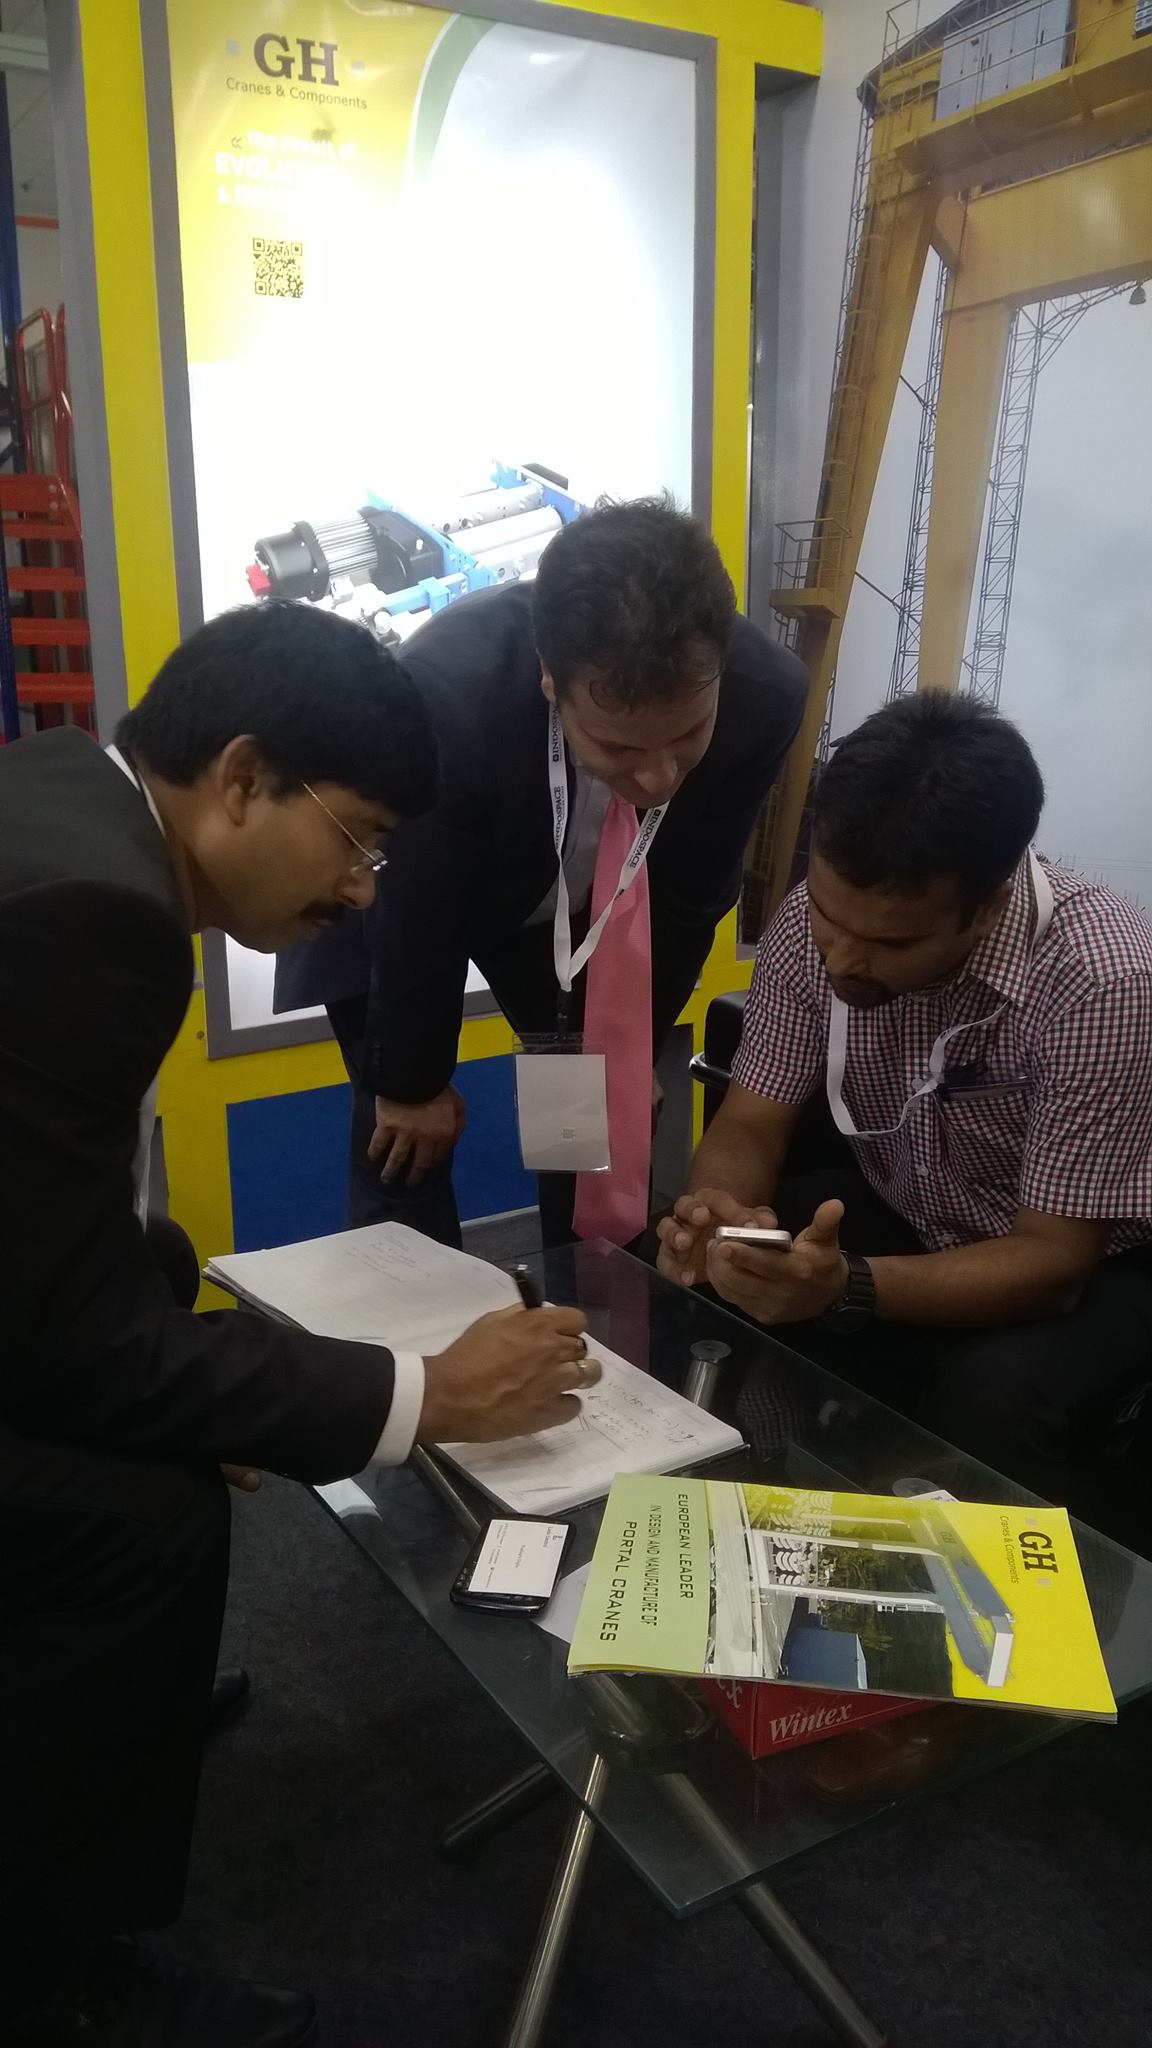 GH Cranes India is waiting for you at The IWS 2015